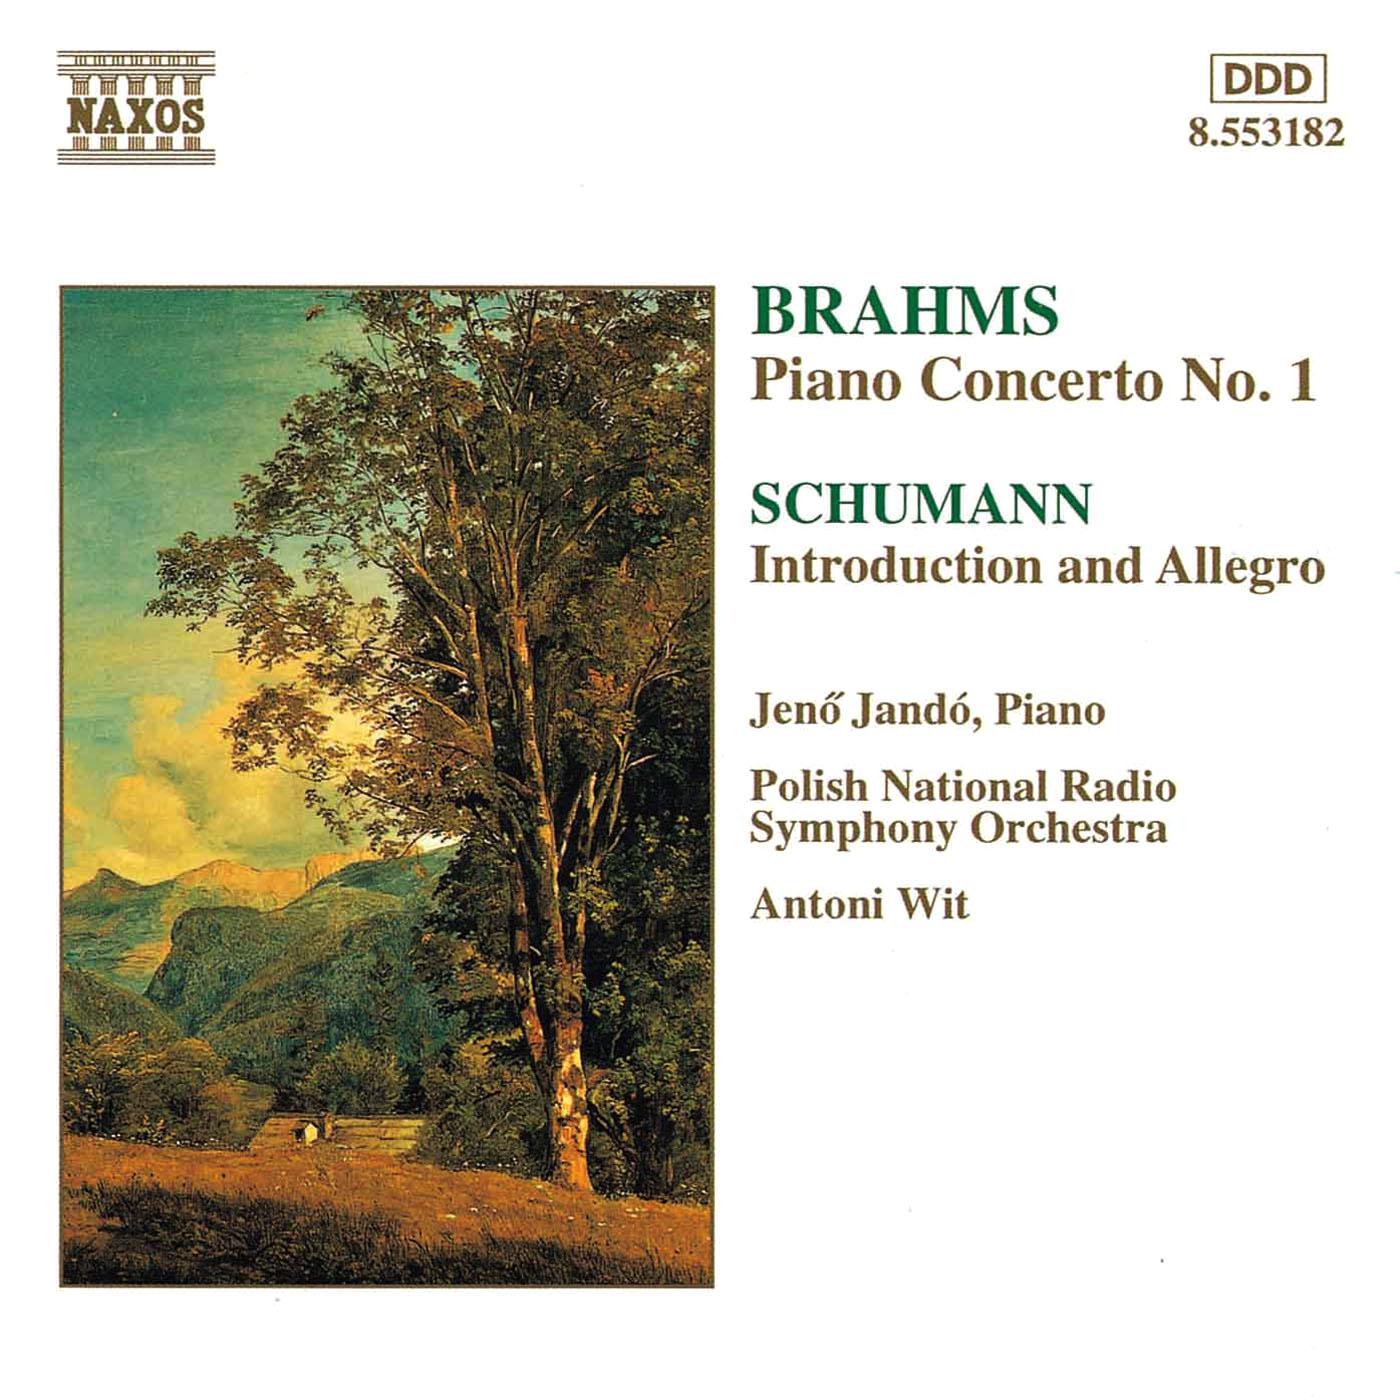 BRAHMS: Piano Concerto No. 1 / SCHUMANN: Introduction and Concerto-Allegro